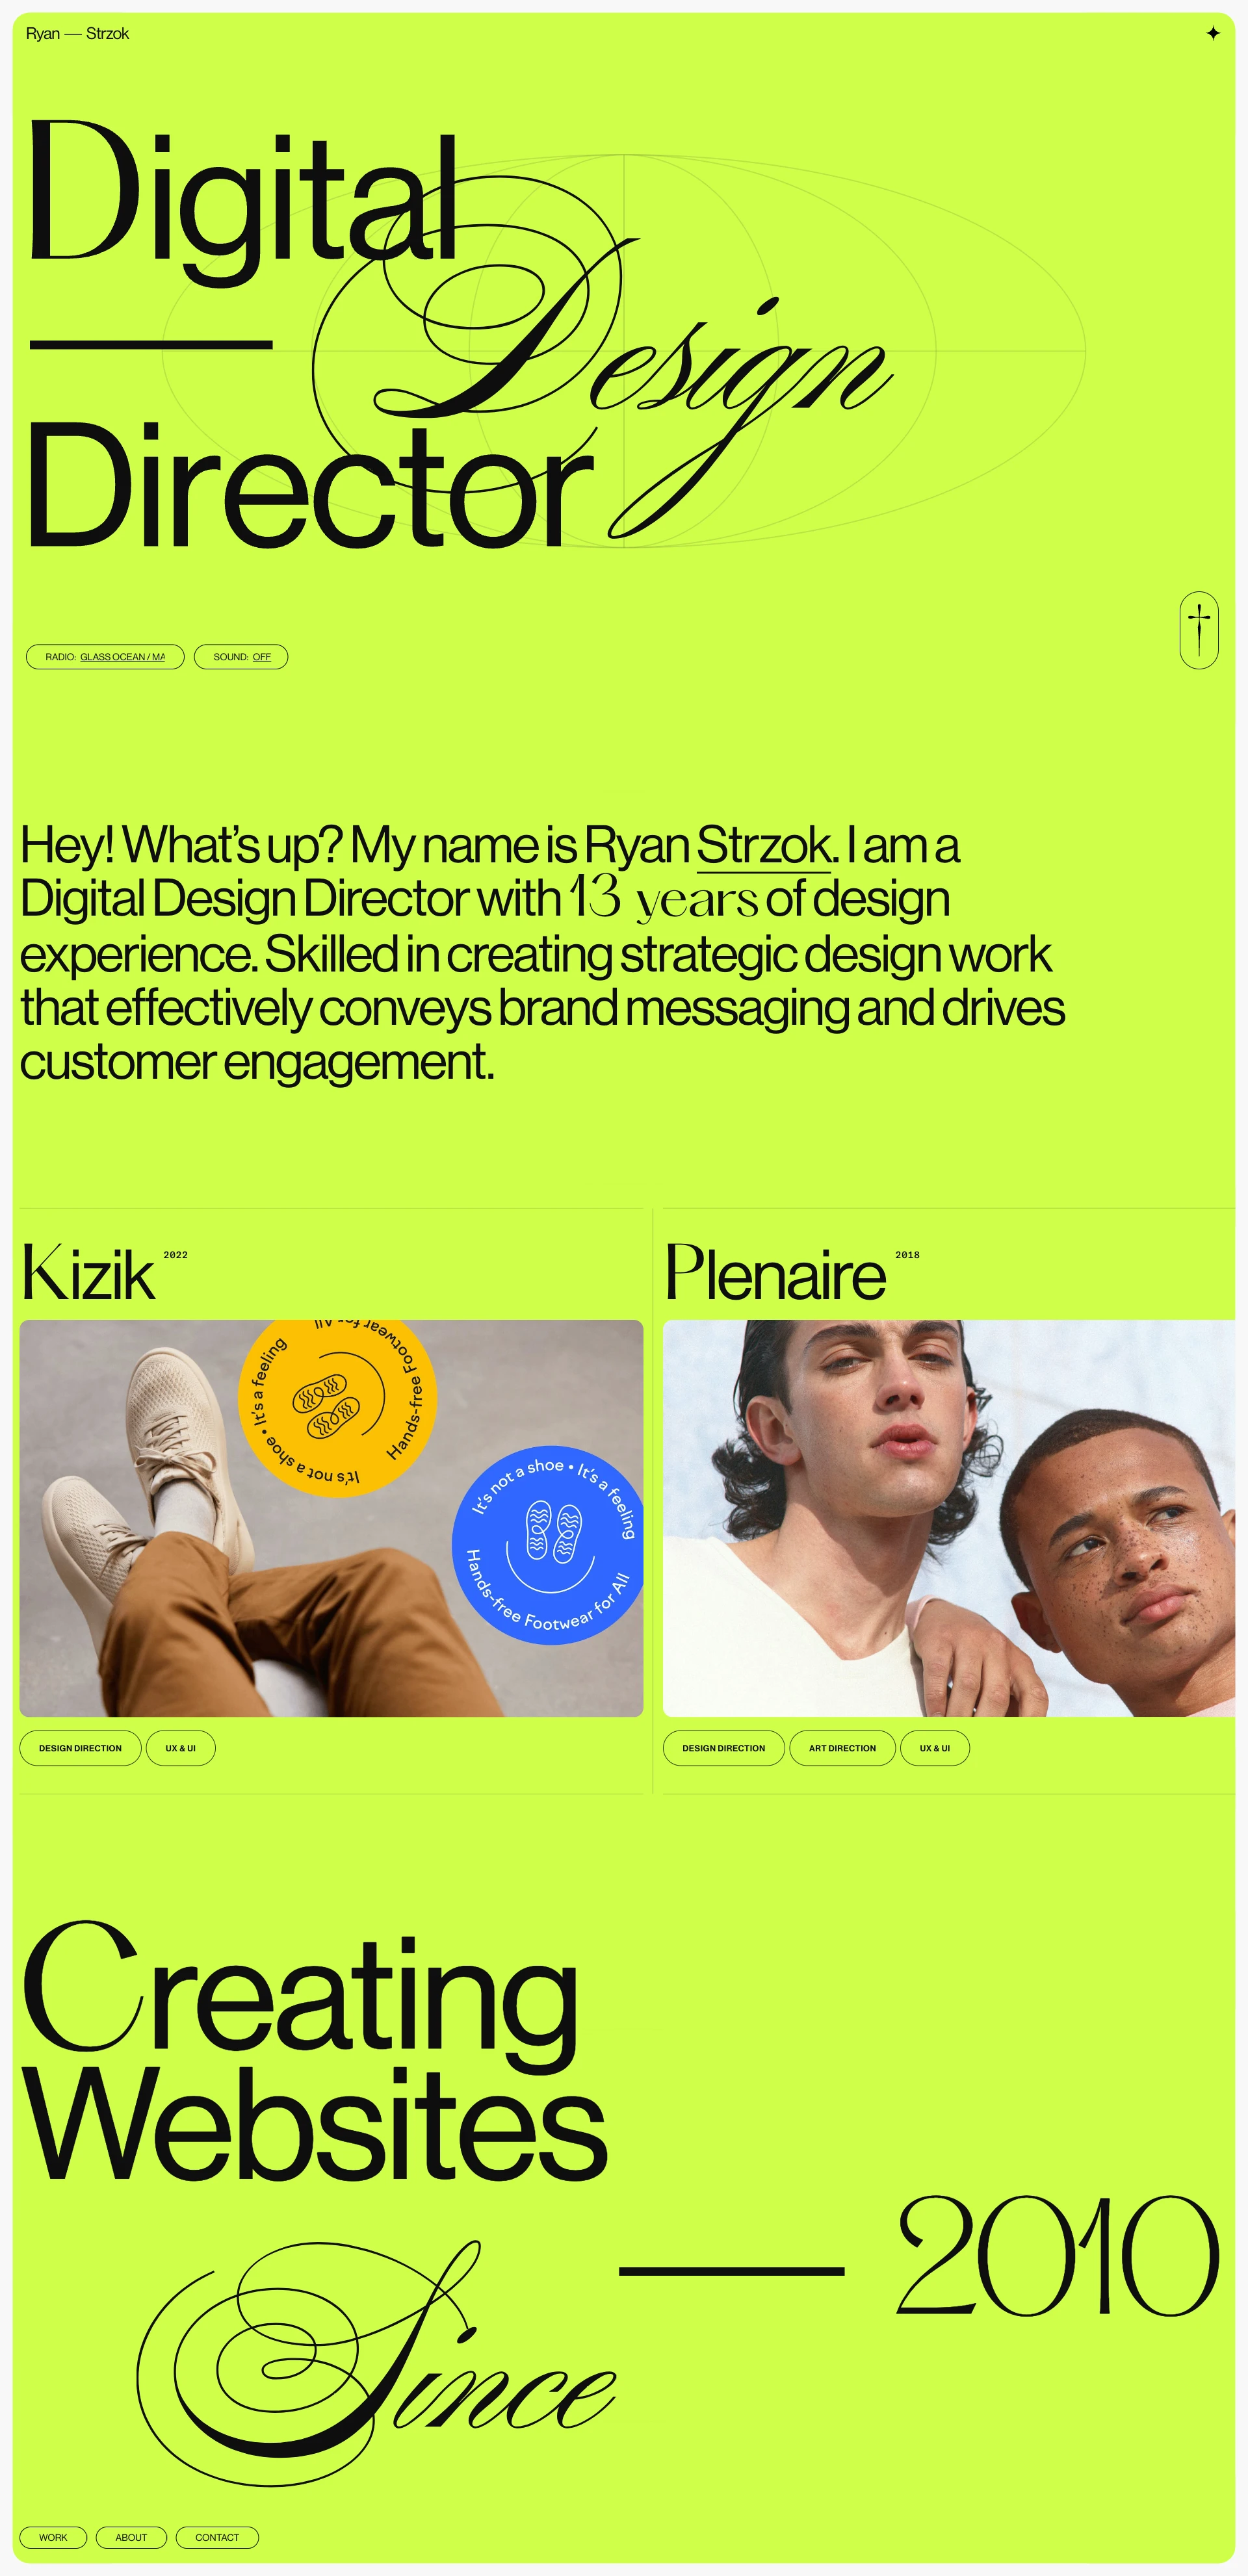 Ryan Strzok Landing Page Example: Hey! What’s up? My name is Ryan Strzok (pronounced struck). I am a Digital Design Director with 13 years of design experience. Skilled in creating strategic design work that effectively conveys brand messaging and drives customer engagement.